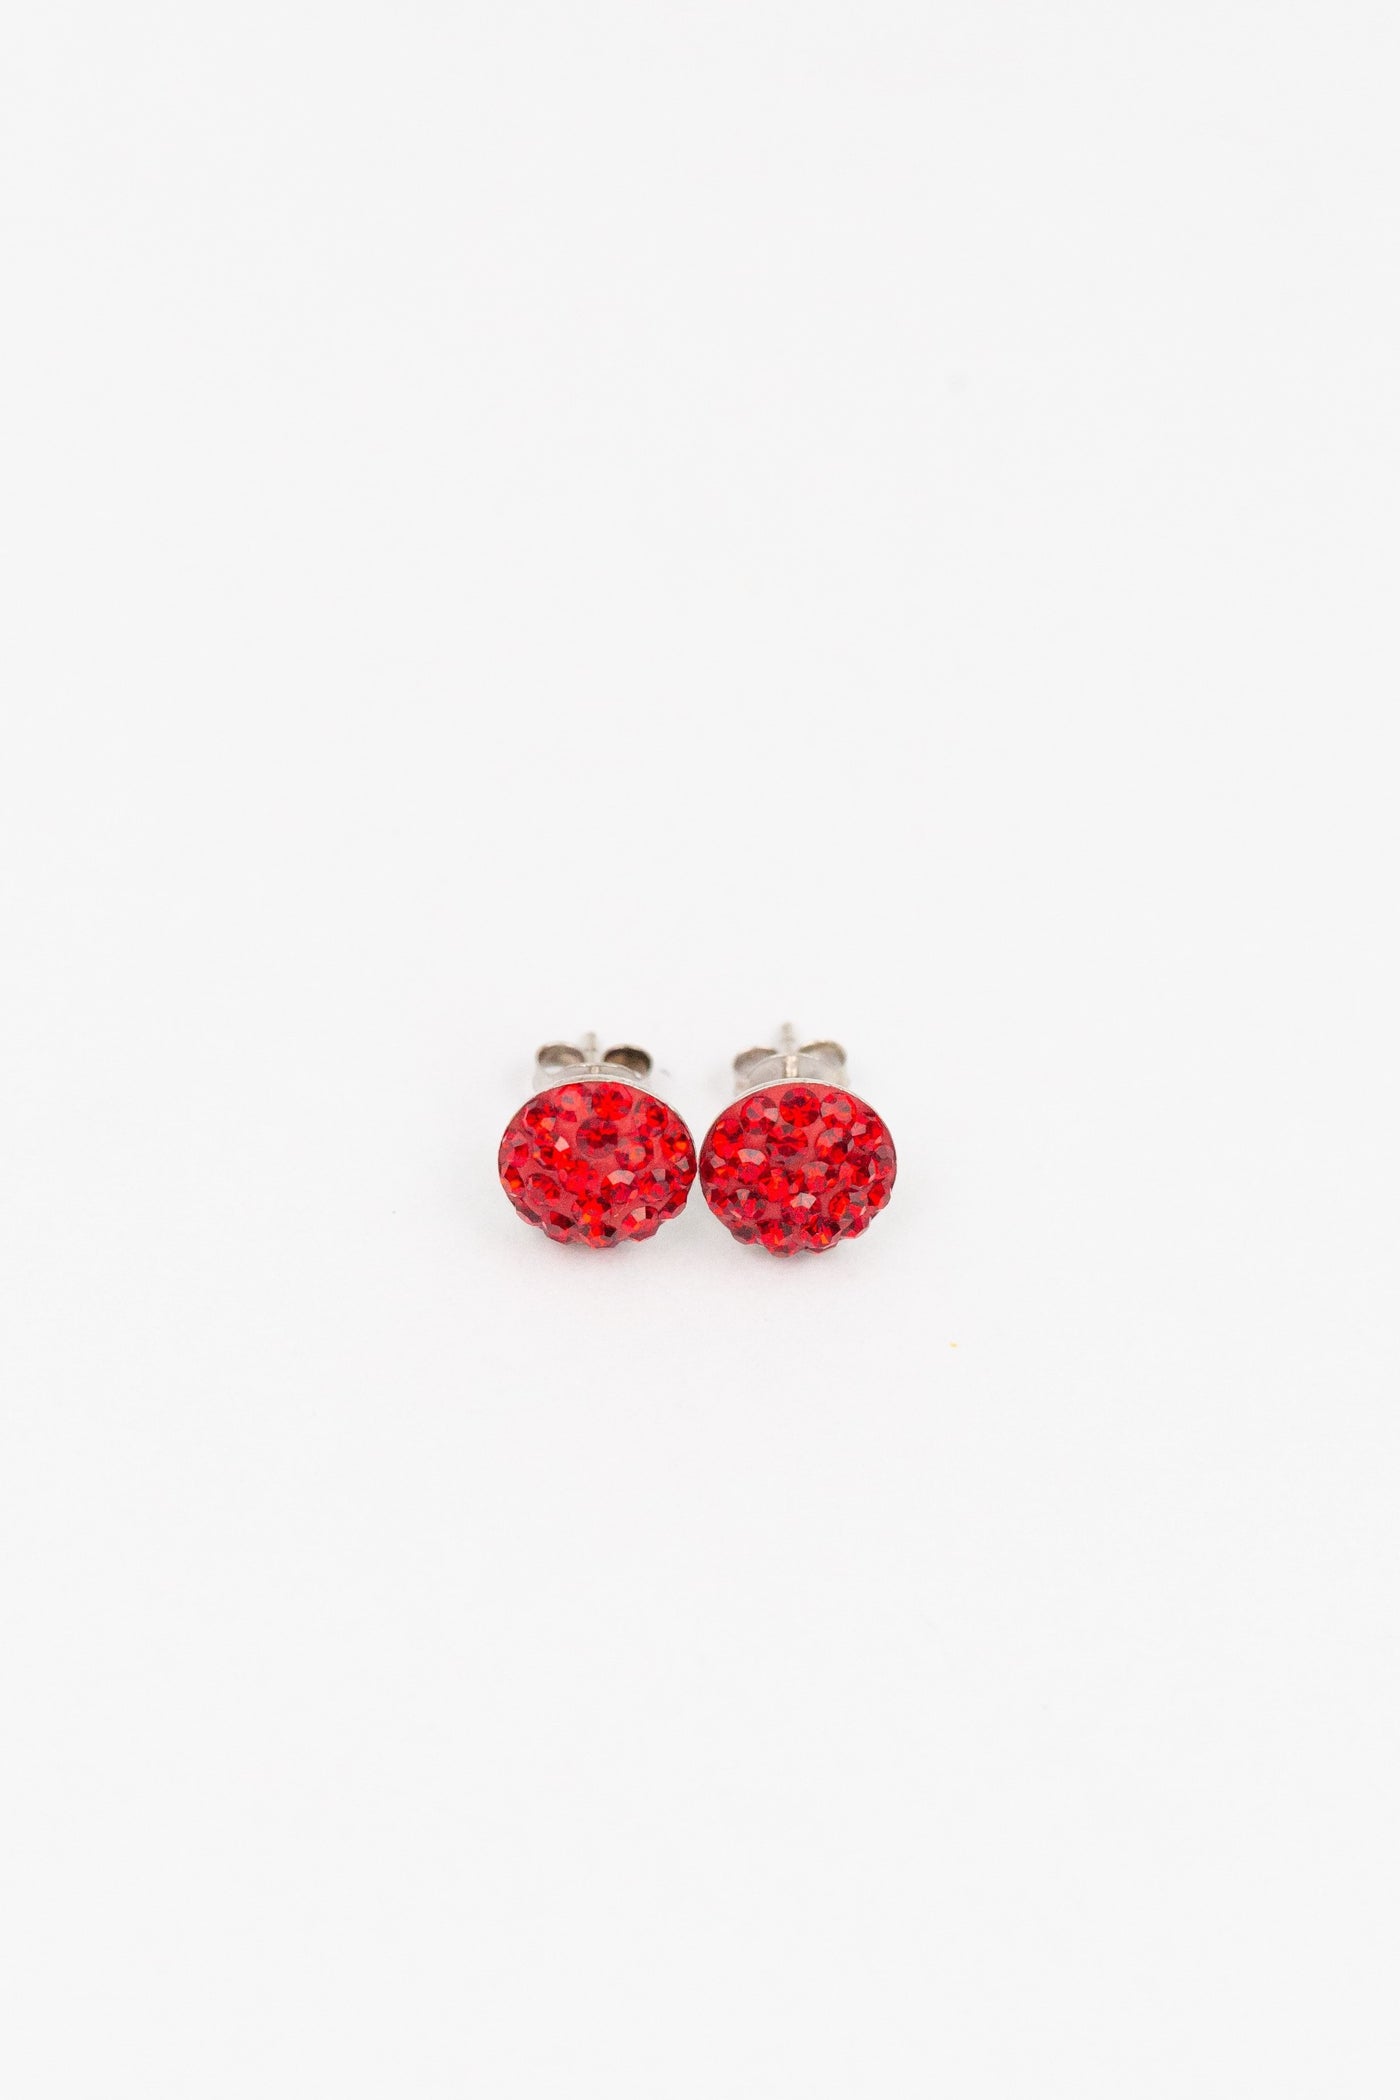 9mm Round Light Siam Red Swarovski Crystal Sterling Silver Earrings | Annie and Sisters | sister stud earrings, for kids, children's jewelry, kid's jewelry, best friend